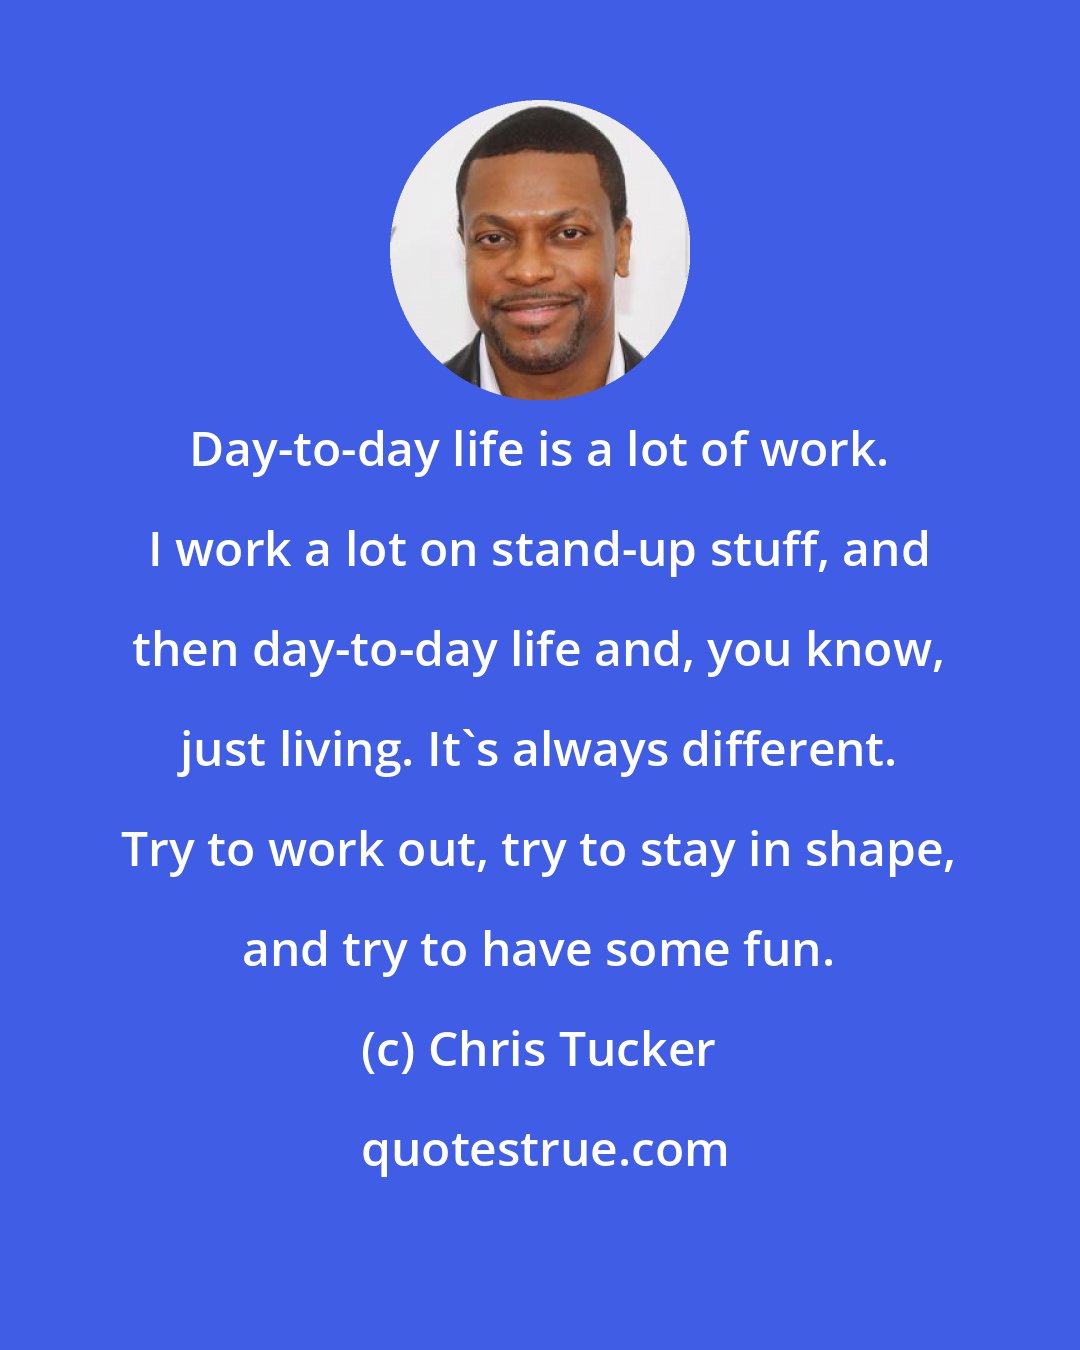 Chris Tucker: Day-to-day life is a lot of work. I work a lot on stand-up stuff, and then day-to-day life and, you know, just living. It's always different. Try to work out, try to stay in shape, and try to have some fun.